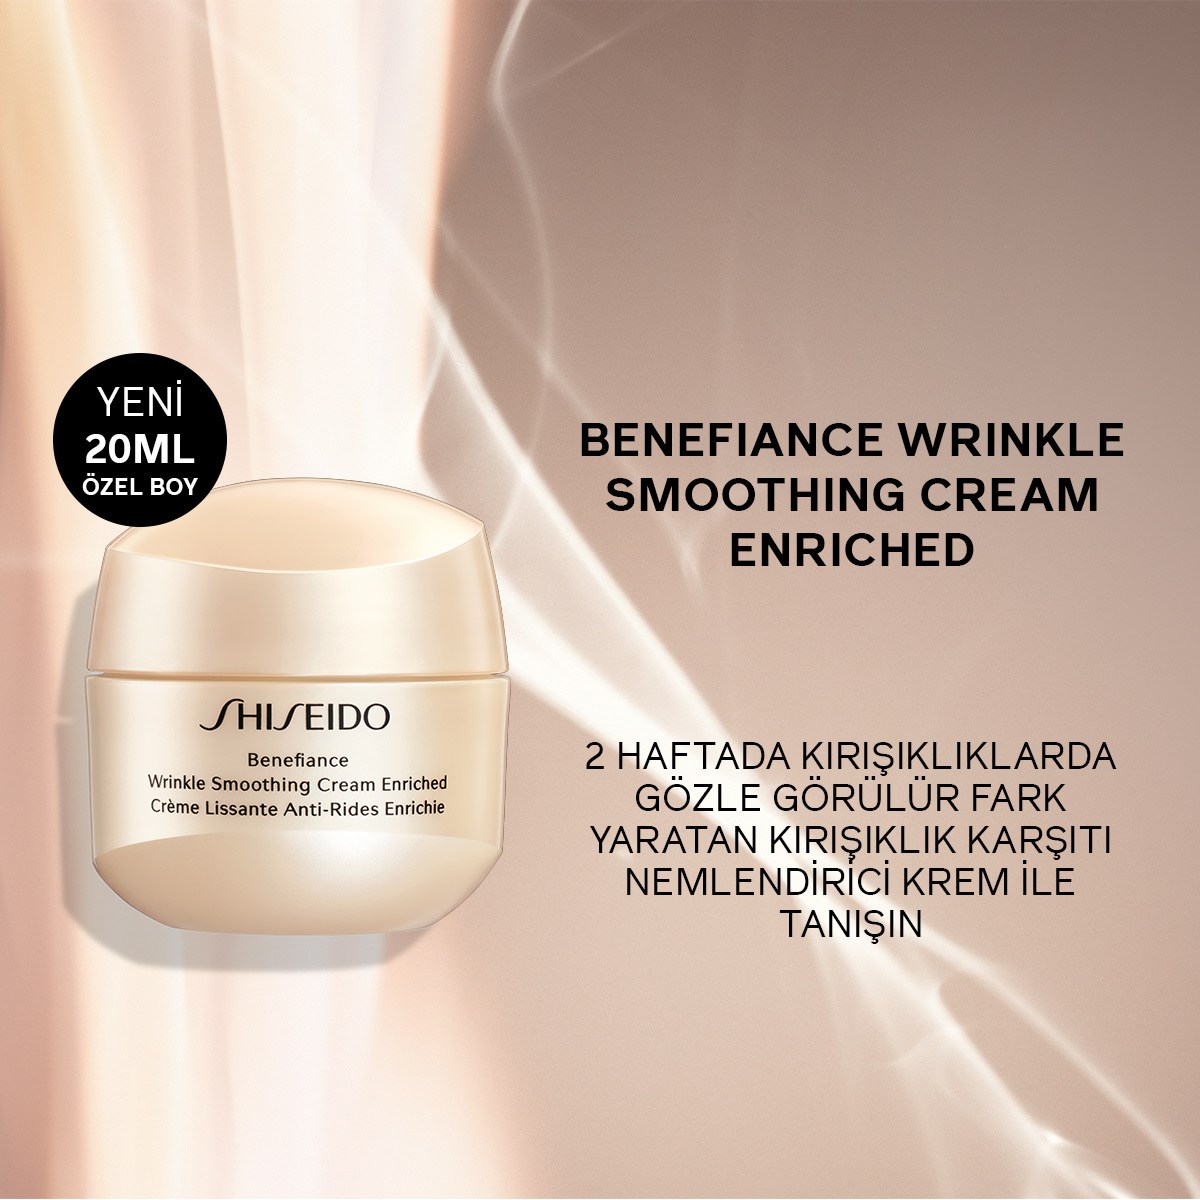 BENEFIANCE WRINKLE SMOOTHING CREAM ENRICHED 20 ML 4